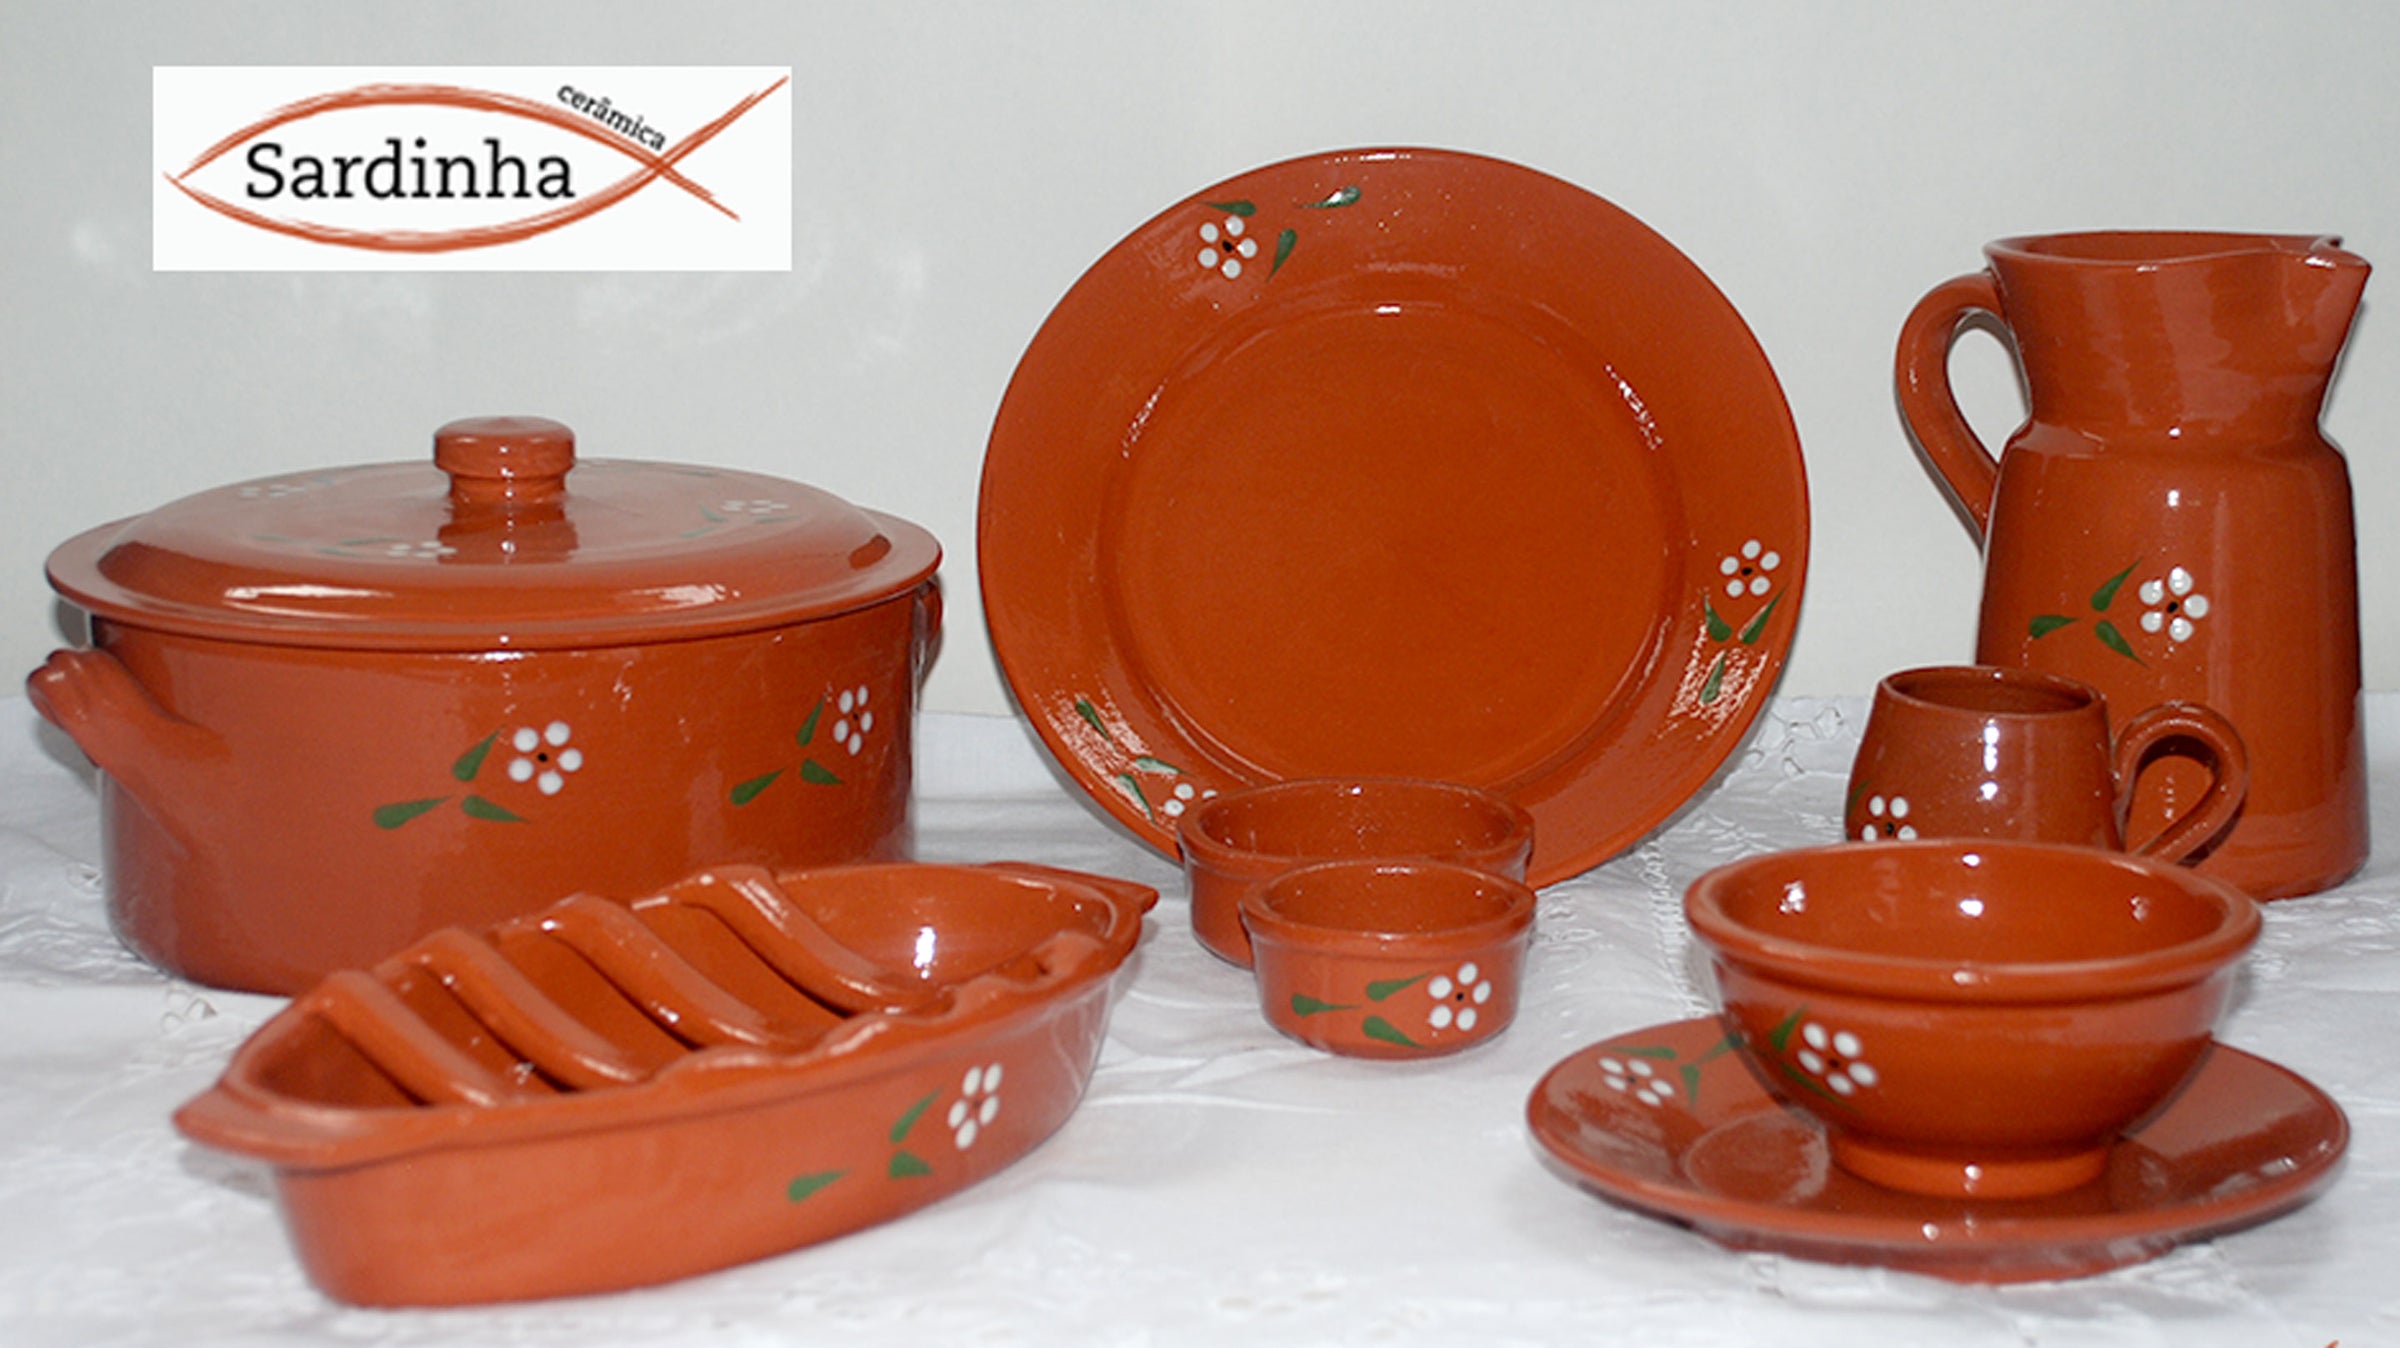 Handmade traditional Portuguese Terracotta clay cookware and servingware.